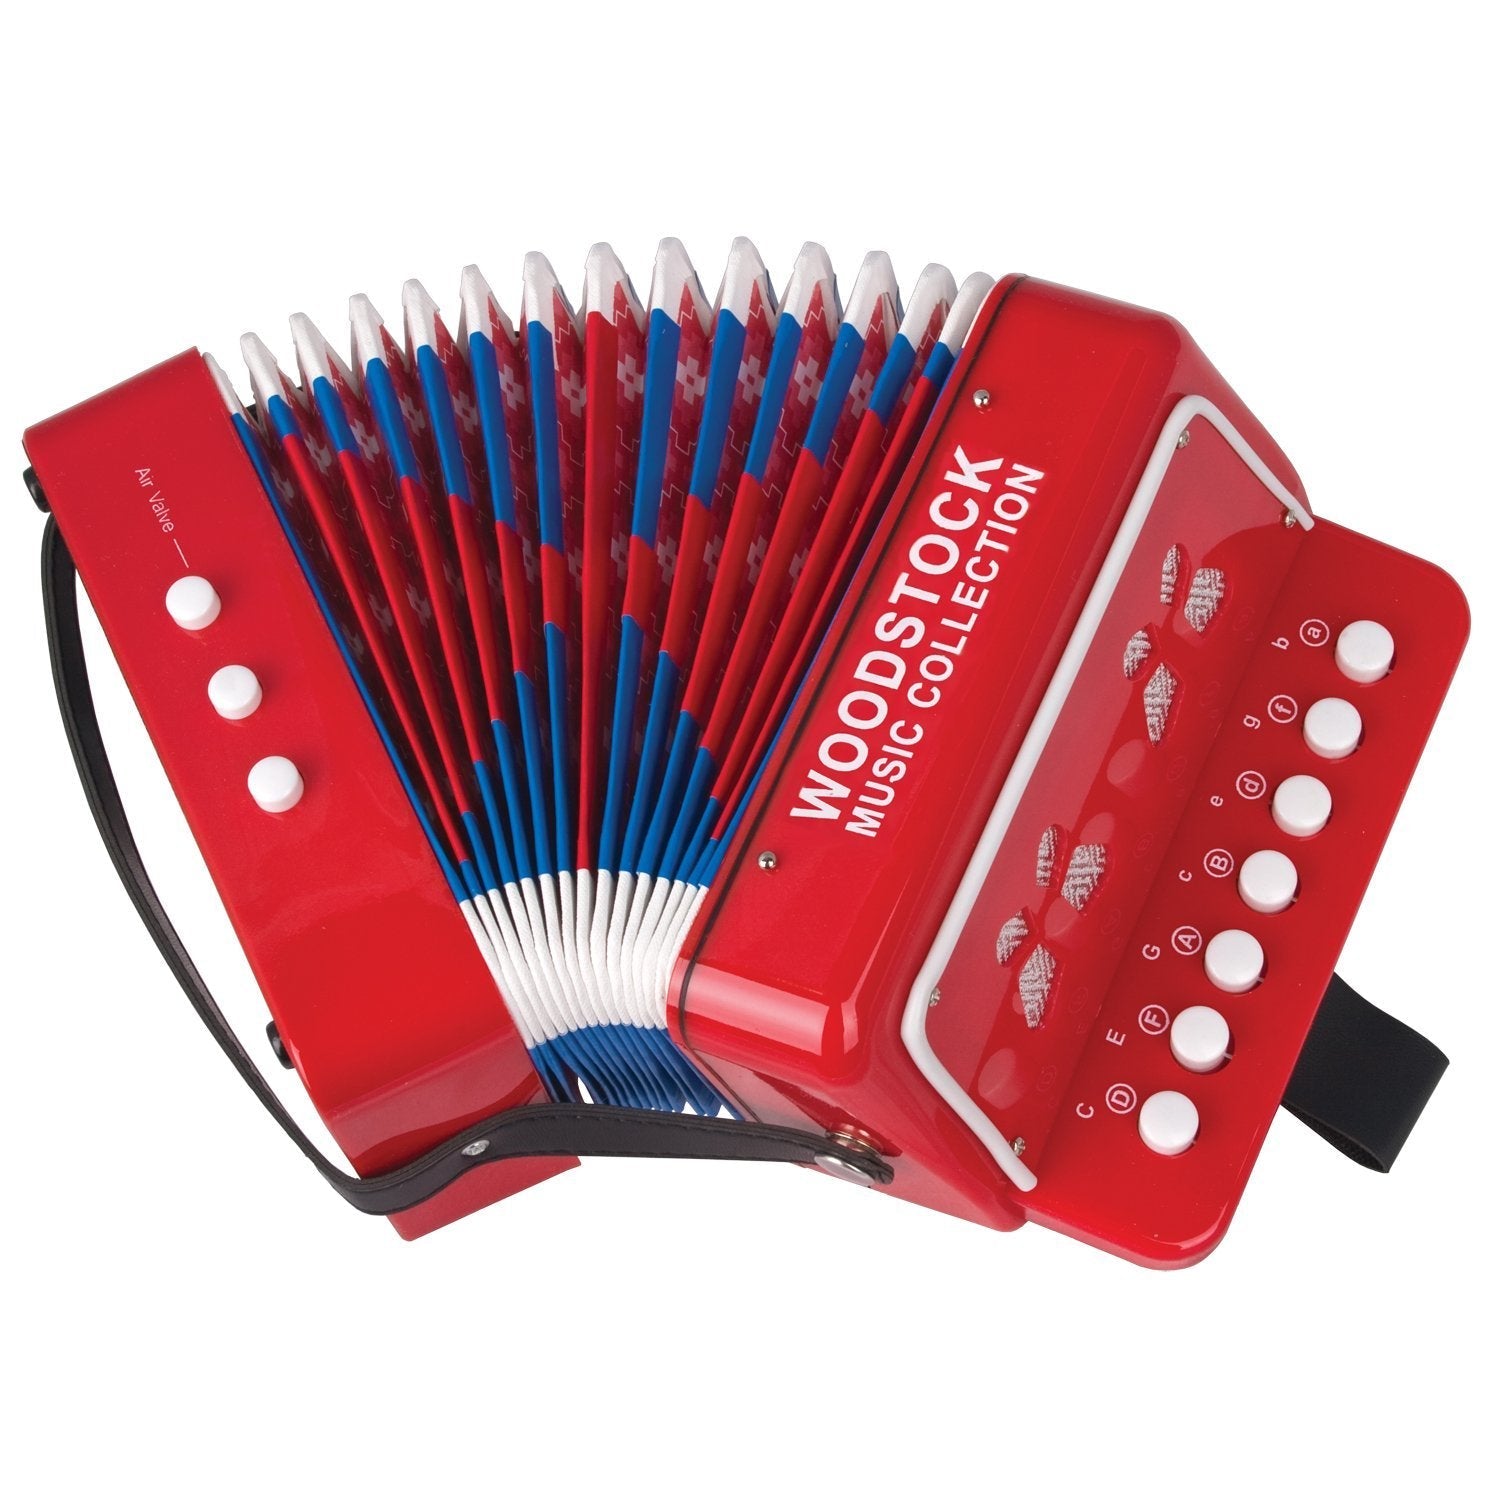 Red and blue toy button accordion with the words "Woodstock Music Collection" written on the top